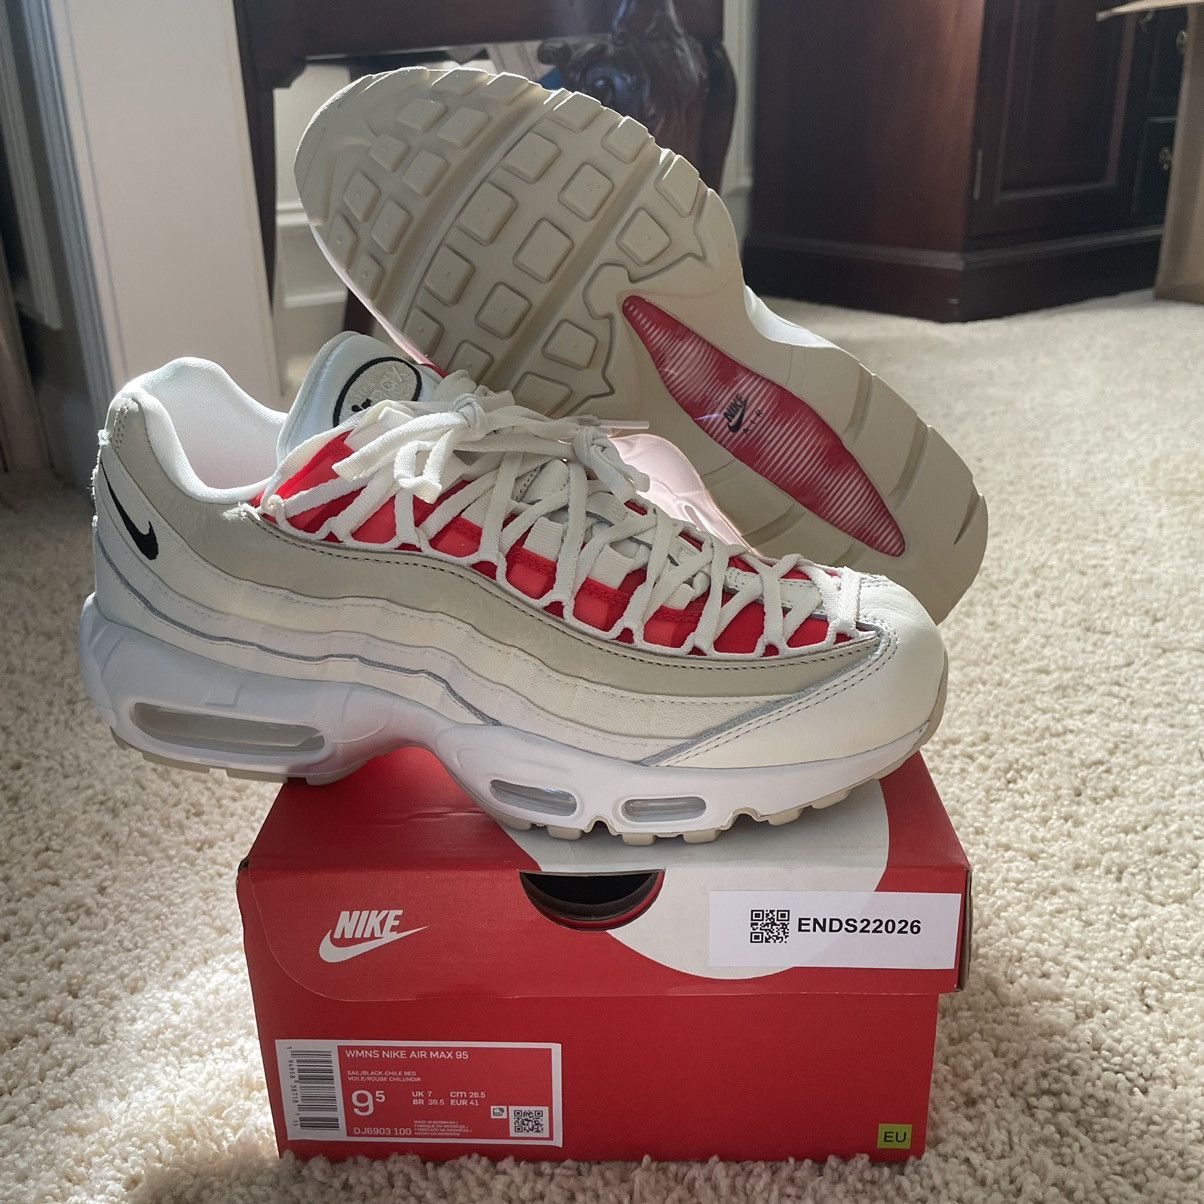 Nike AiR MAX 95 DOUBLE LACE SAiL COCONUT MiLK CHiLE RED | Grailed